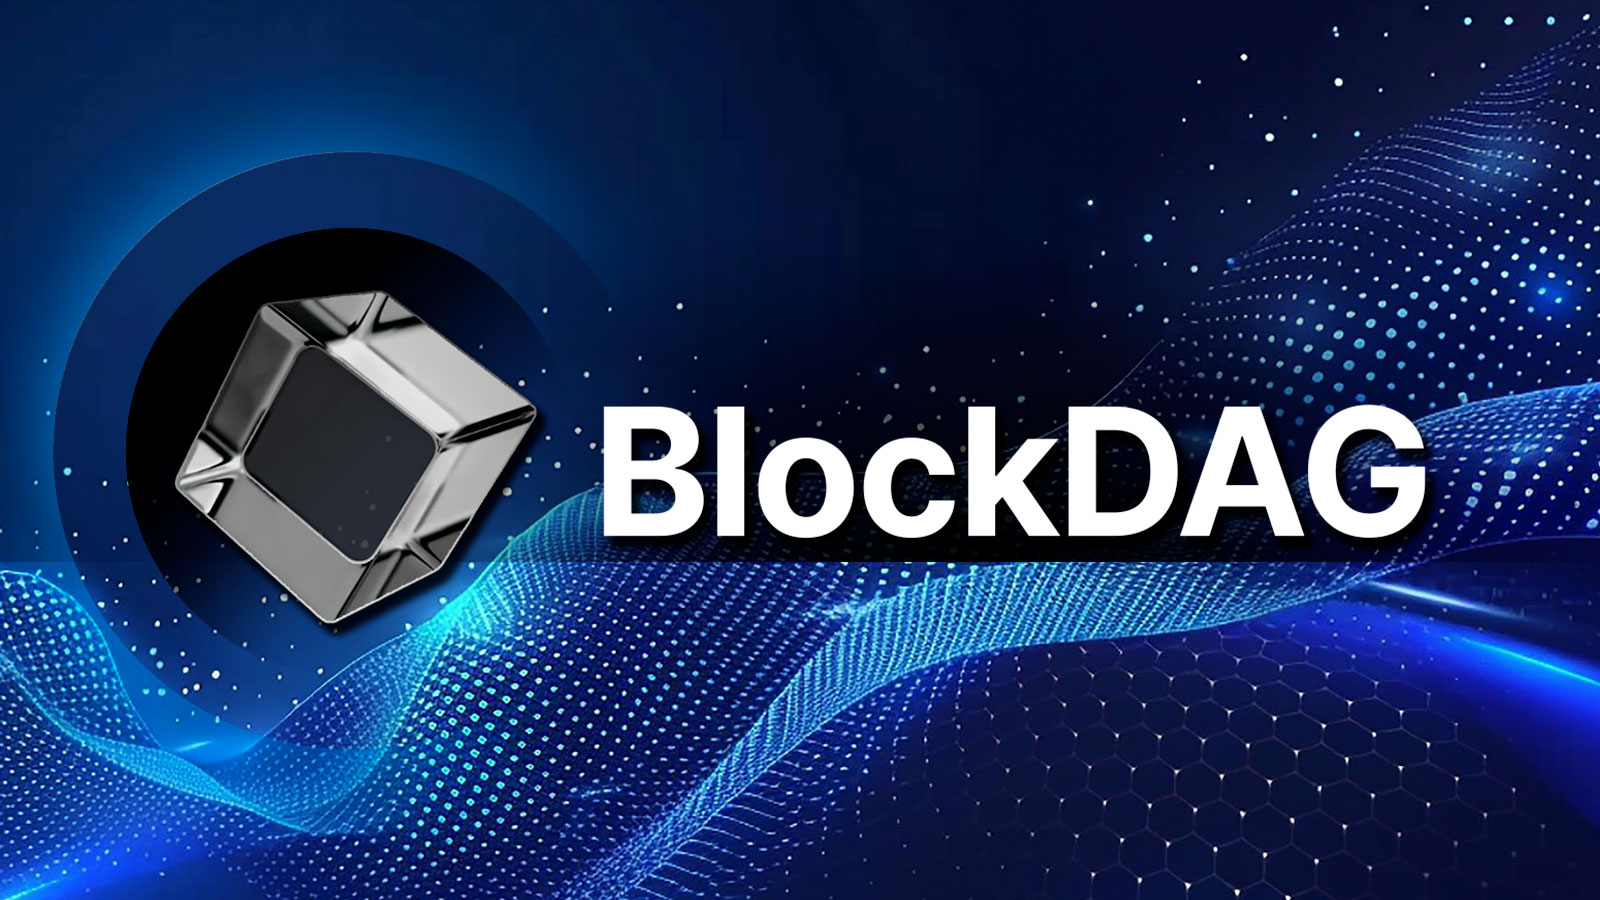 BlockDAG (BDAG) Crypto Pre-Sale in Spotlight for Altcoiners in Q2 as VeChain (VET) and Binance Coin (BNB) Reach New Price Levels